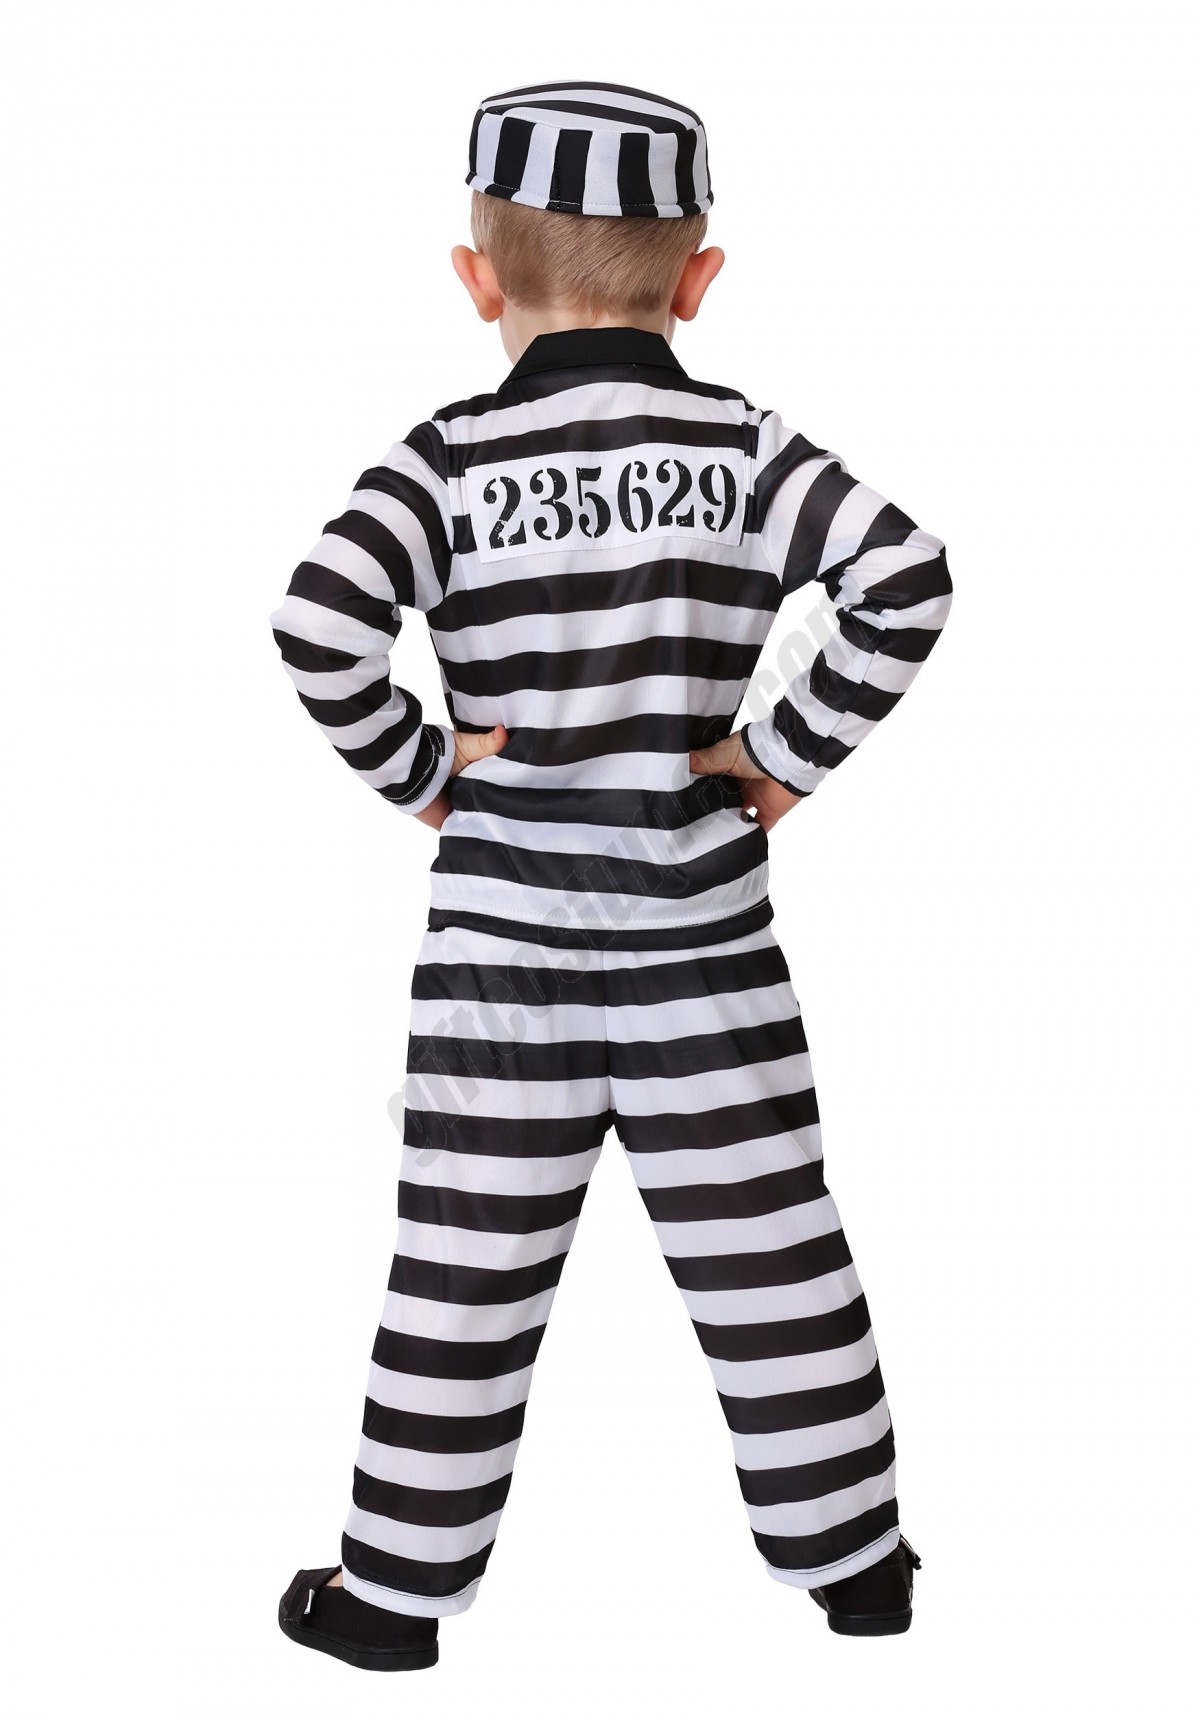 Toddler Delluxe Button Down Boys Jailbird Costume Promotions - -1